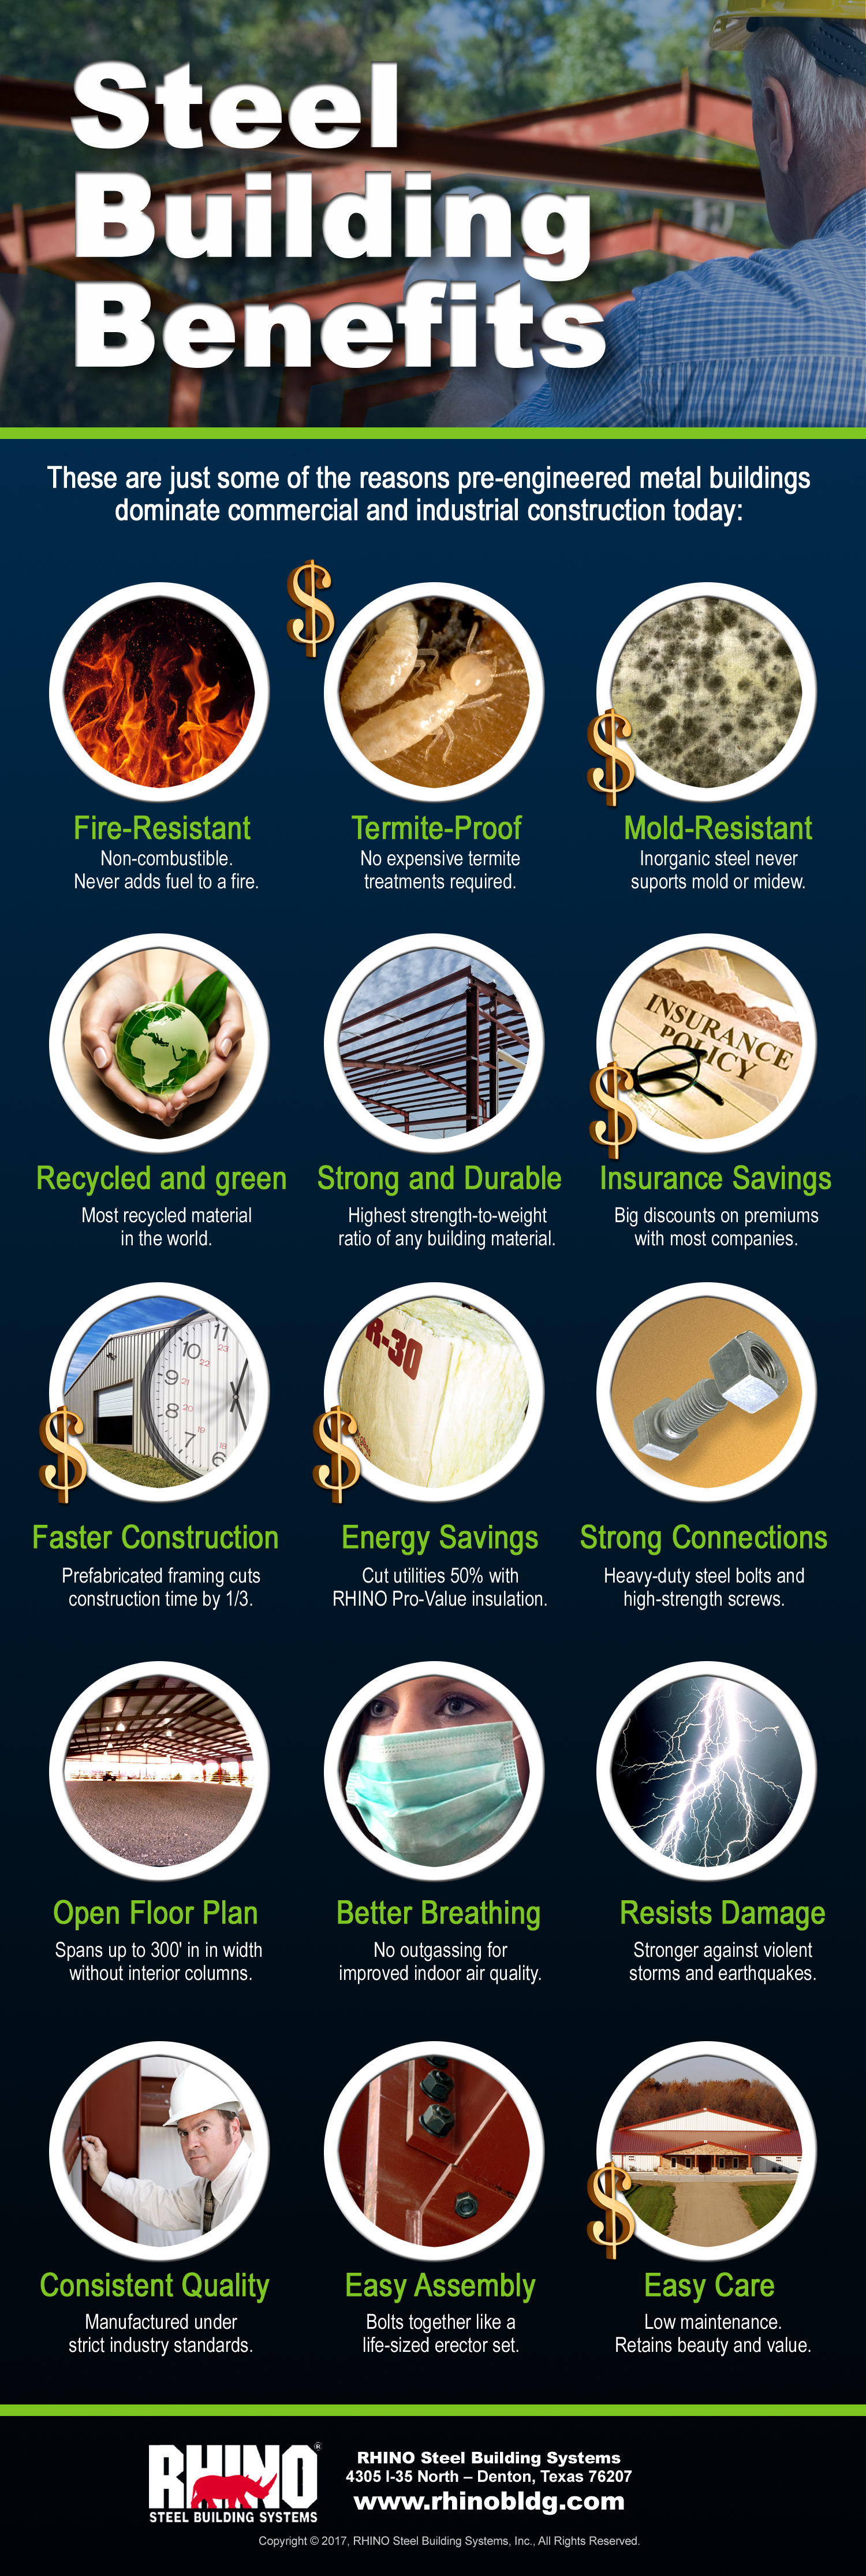 RHINO infographic shows 15 steel building benefits.